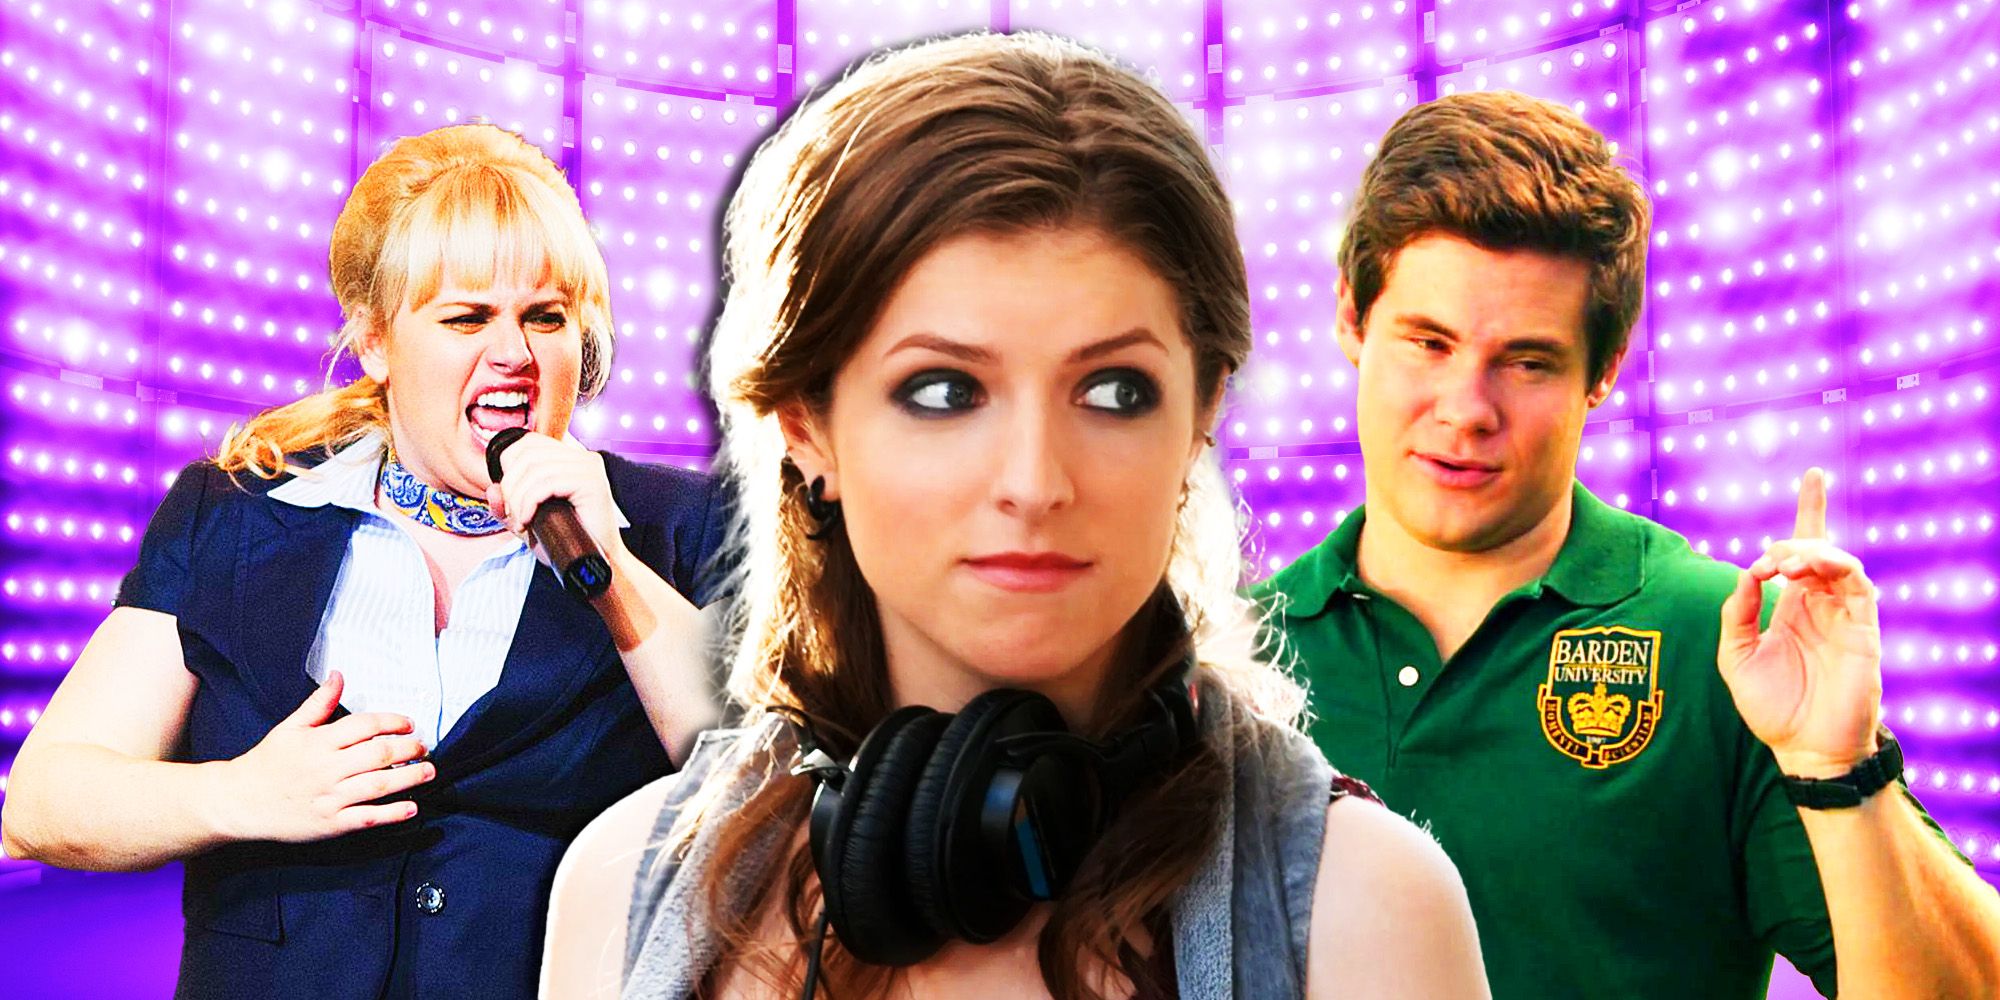 A custom image featuring Amy, Beca, and Bumper in Pitch Perfect